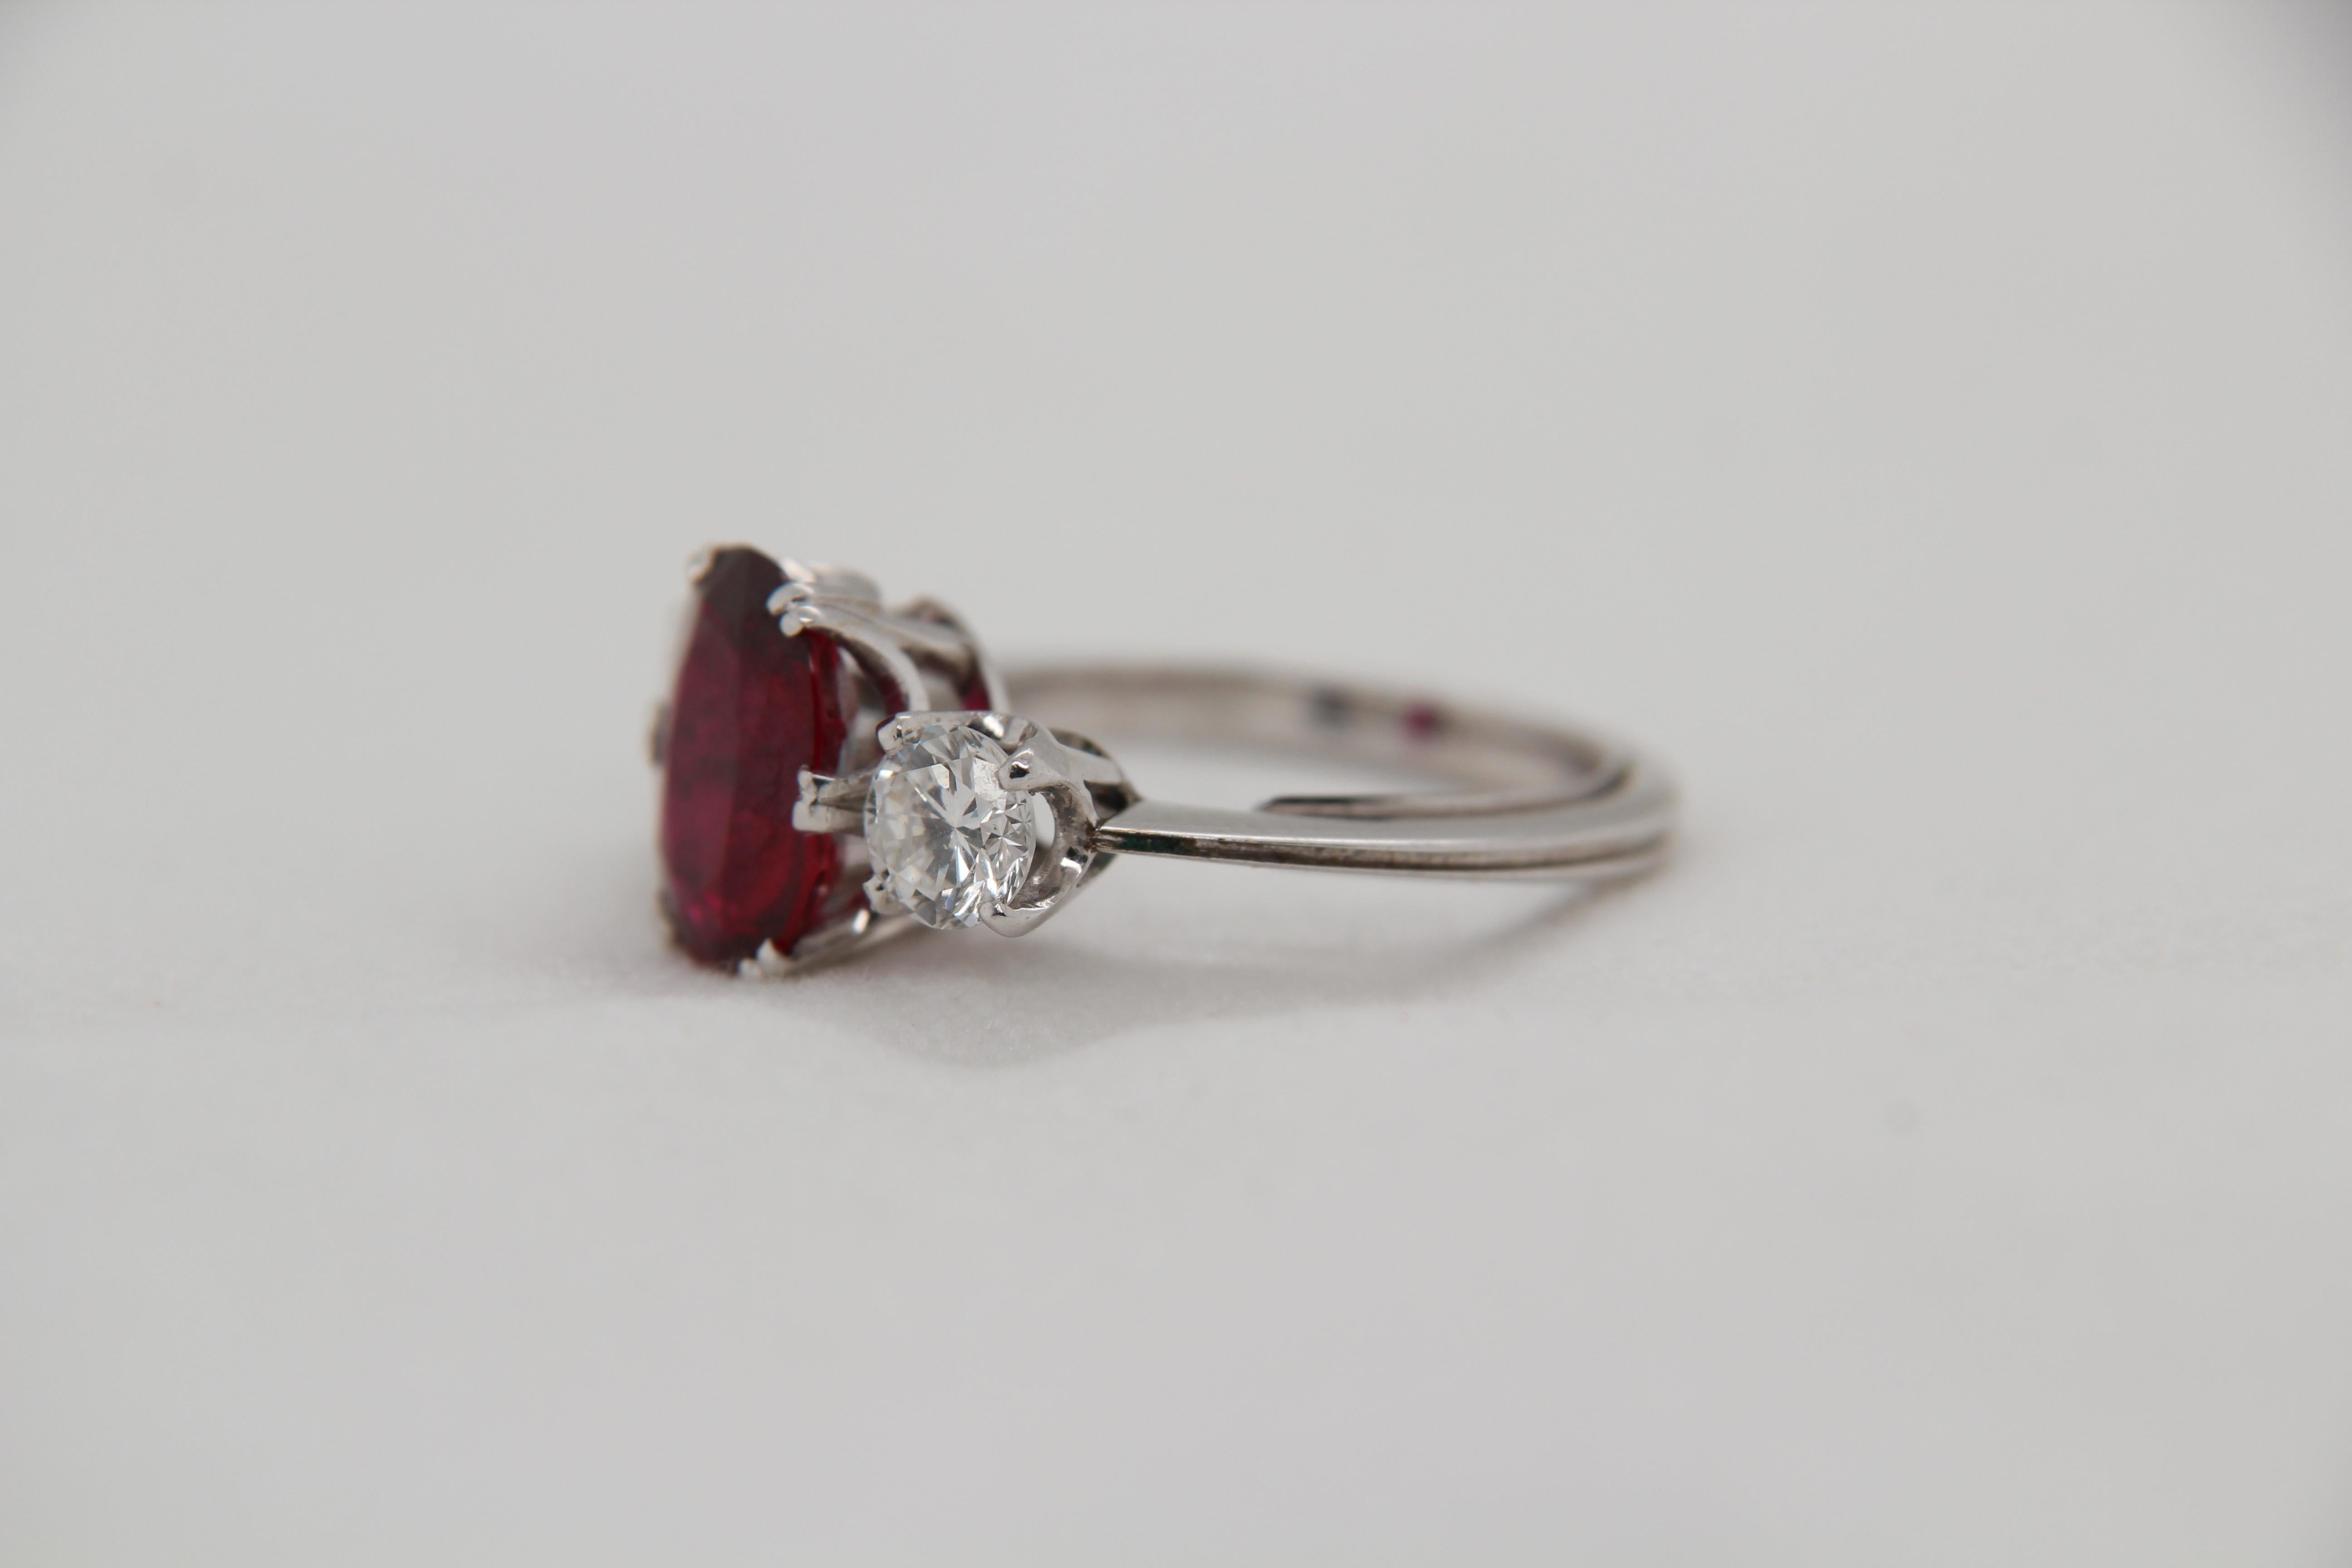 A new GRS certified 2.94 carat Thai Heated ruby ring mounted with diamonds in 18 Karat gold. The ruby weighs 2.94 carat and is certified by Gem Research Swisslab (GRS) as natural, heated. The total diamond weight is 1.00 carat and the total rings